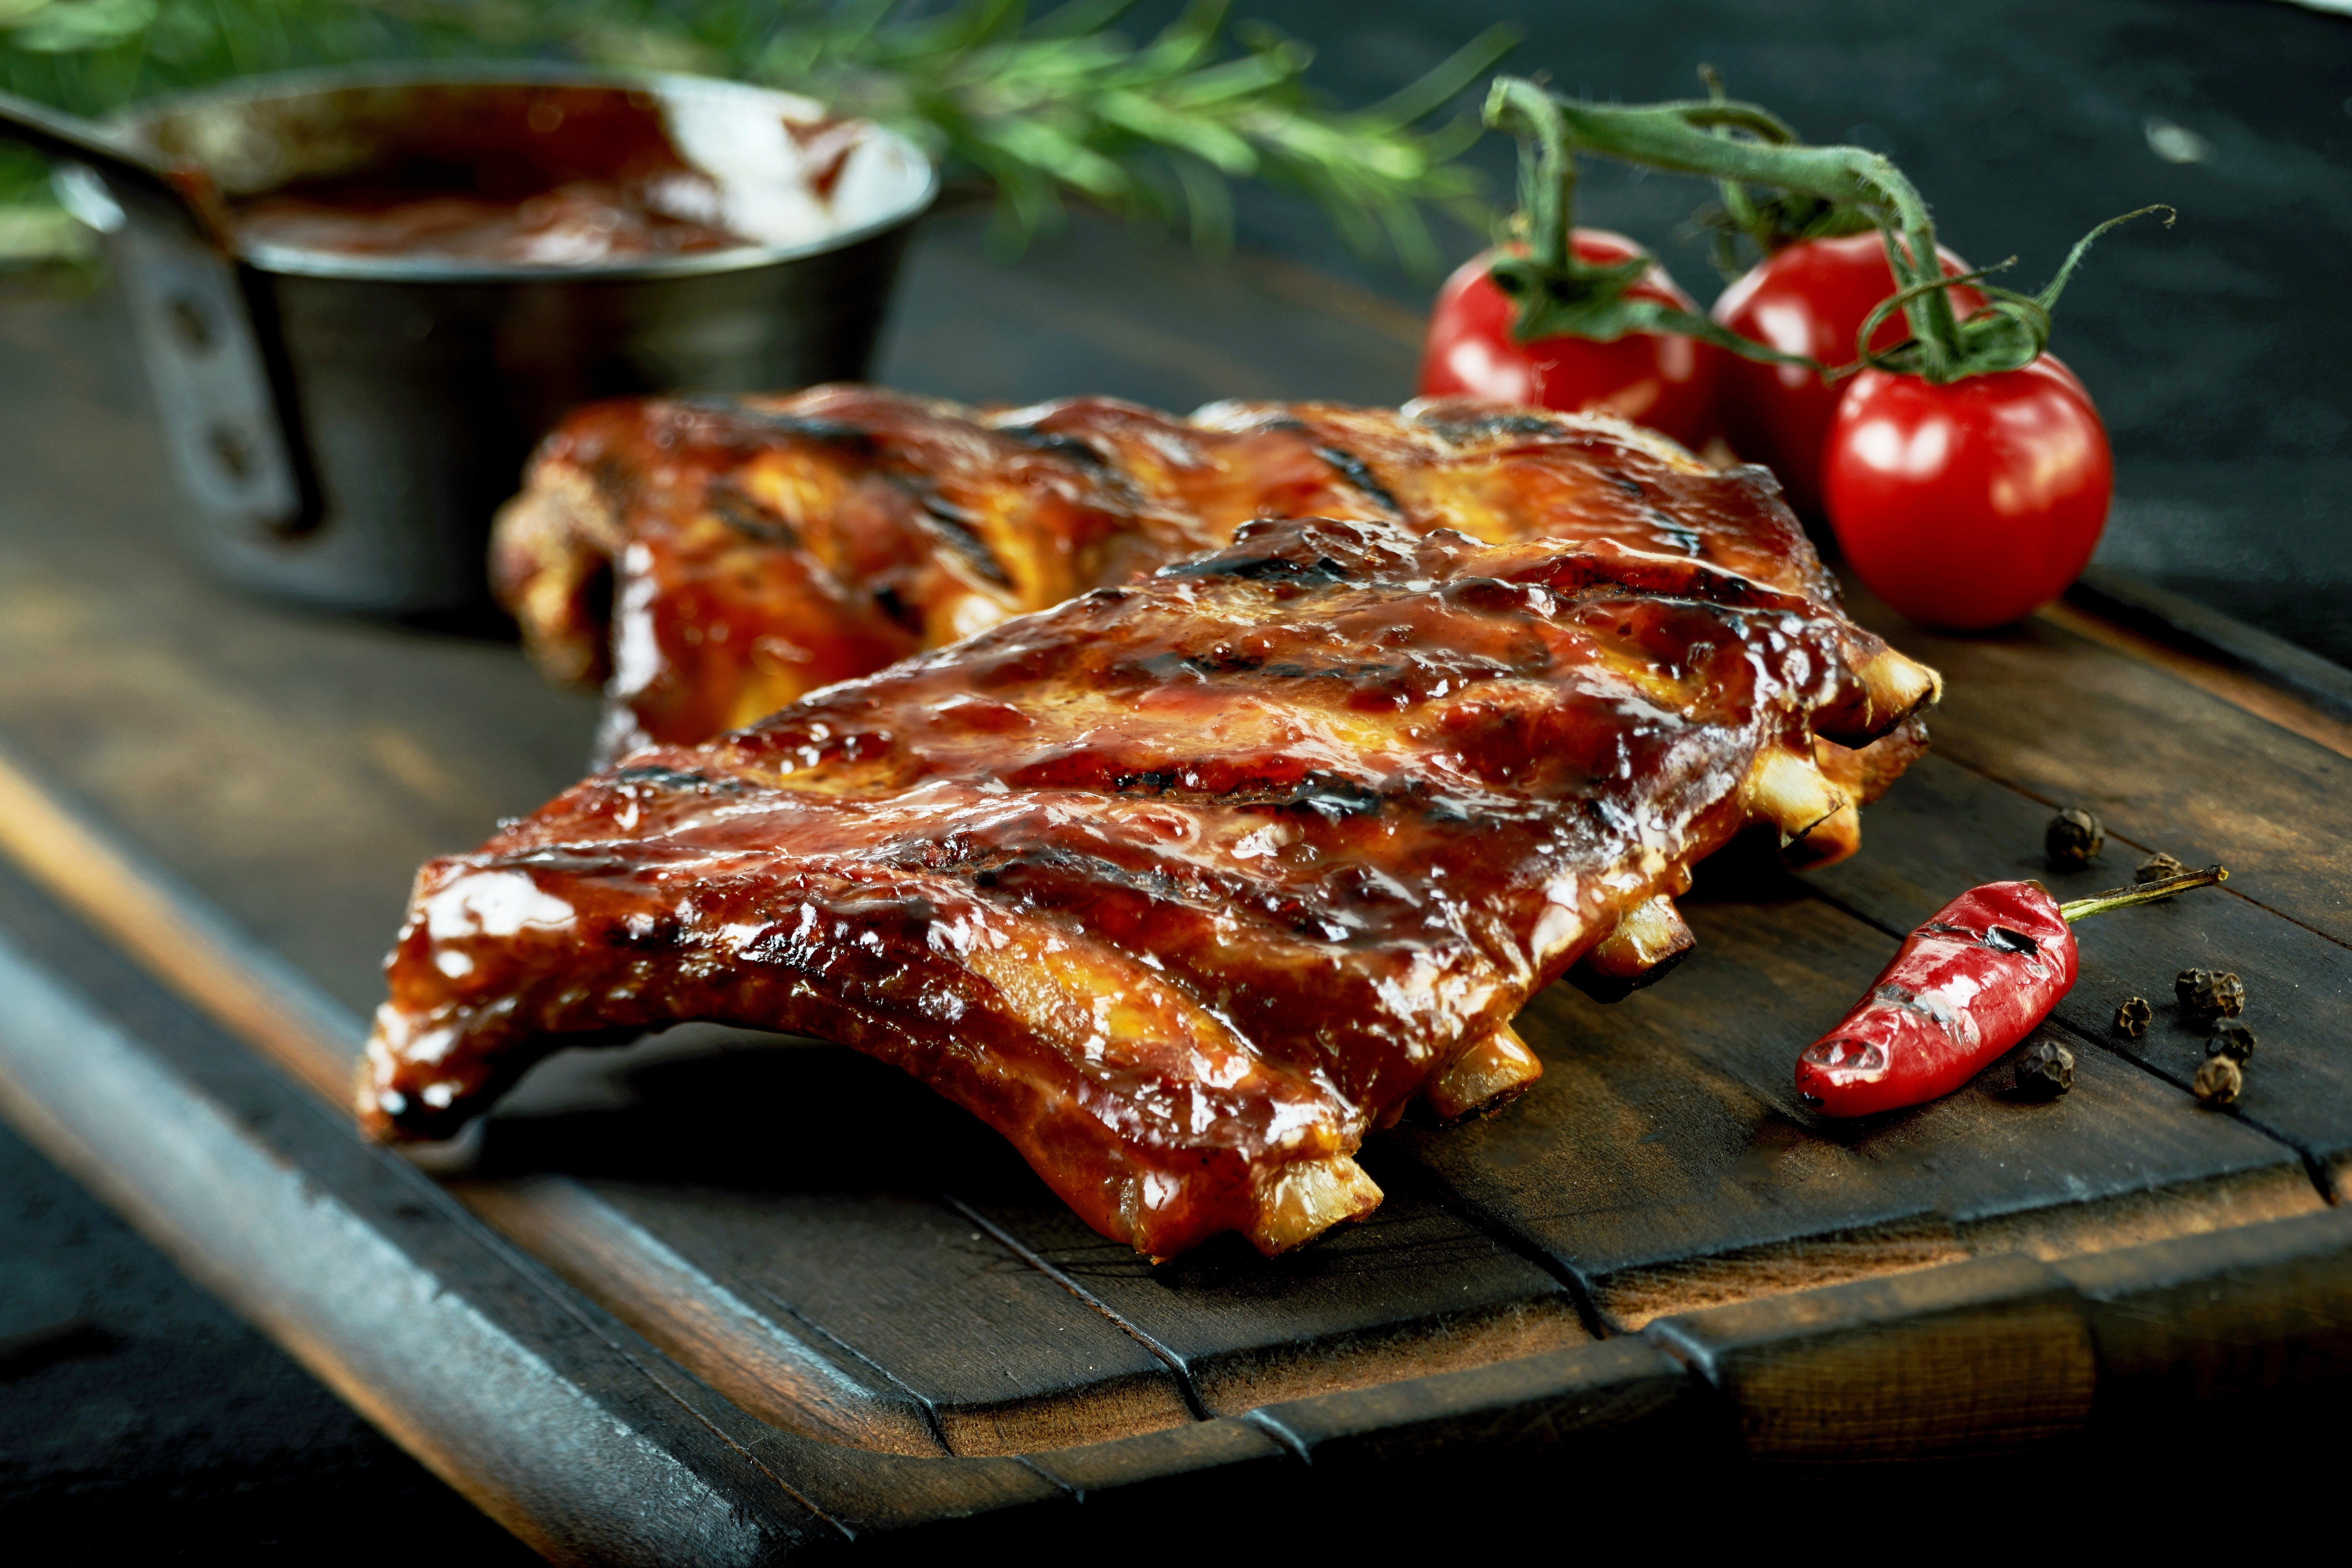 How to Grill Ribs – Well Textured and Smoky